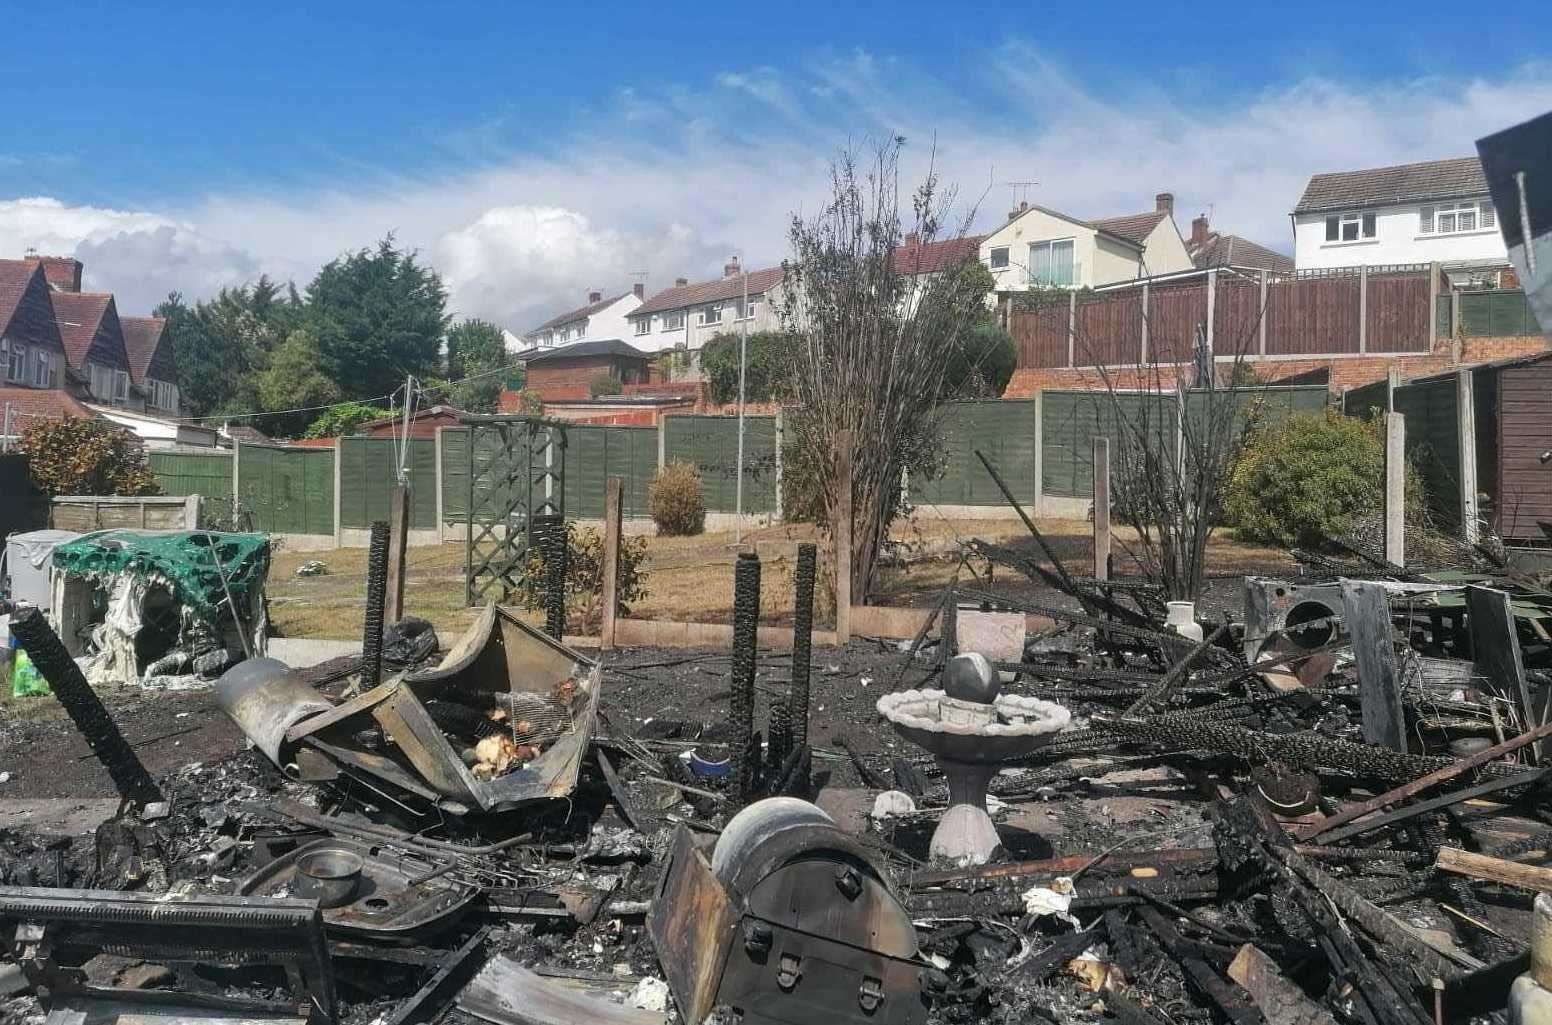 All that was left after the blaze in the back garden of the family's home